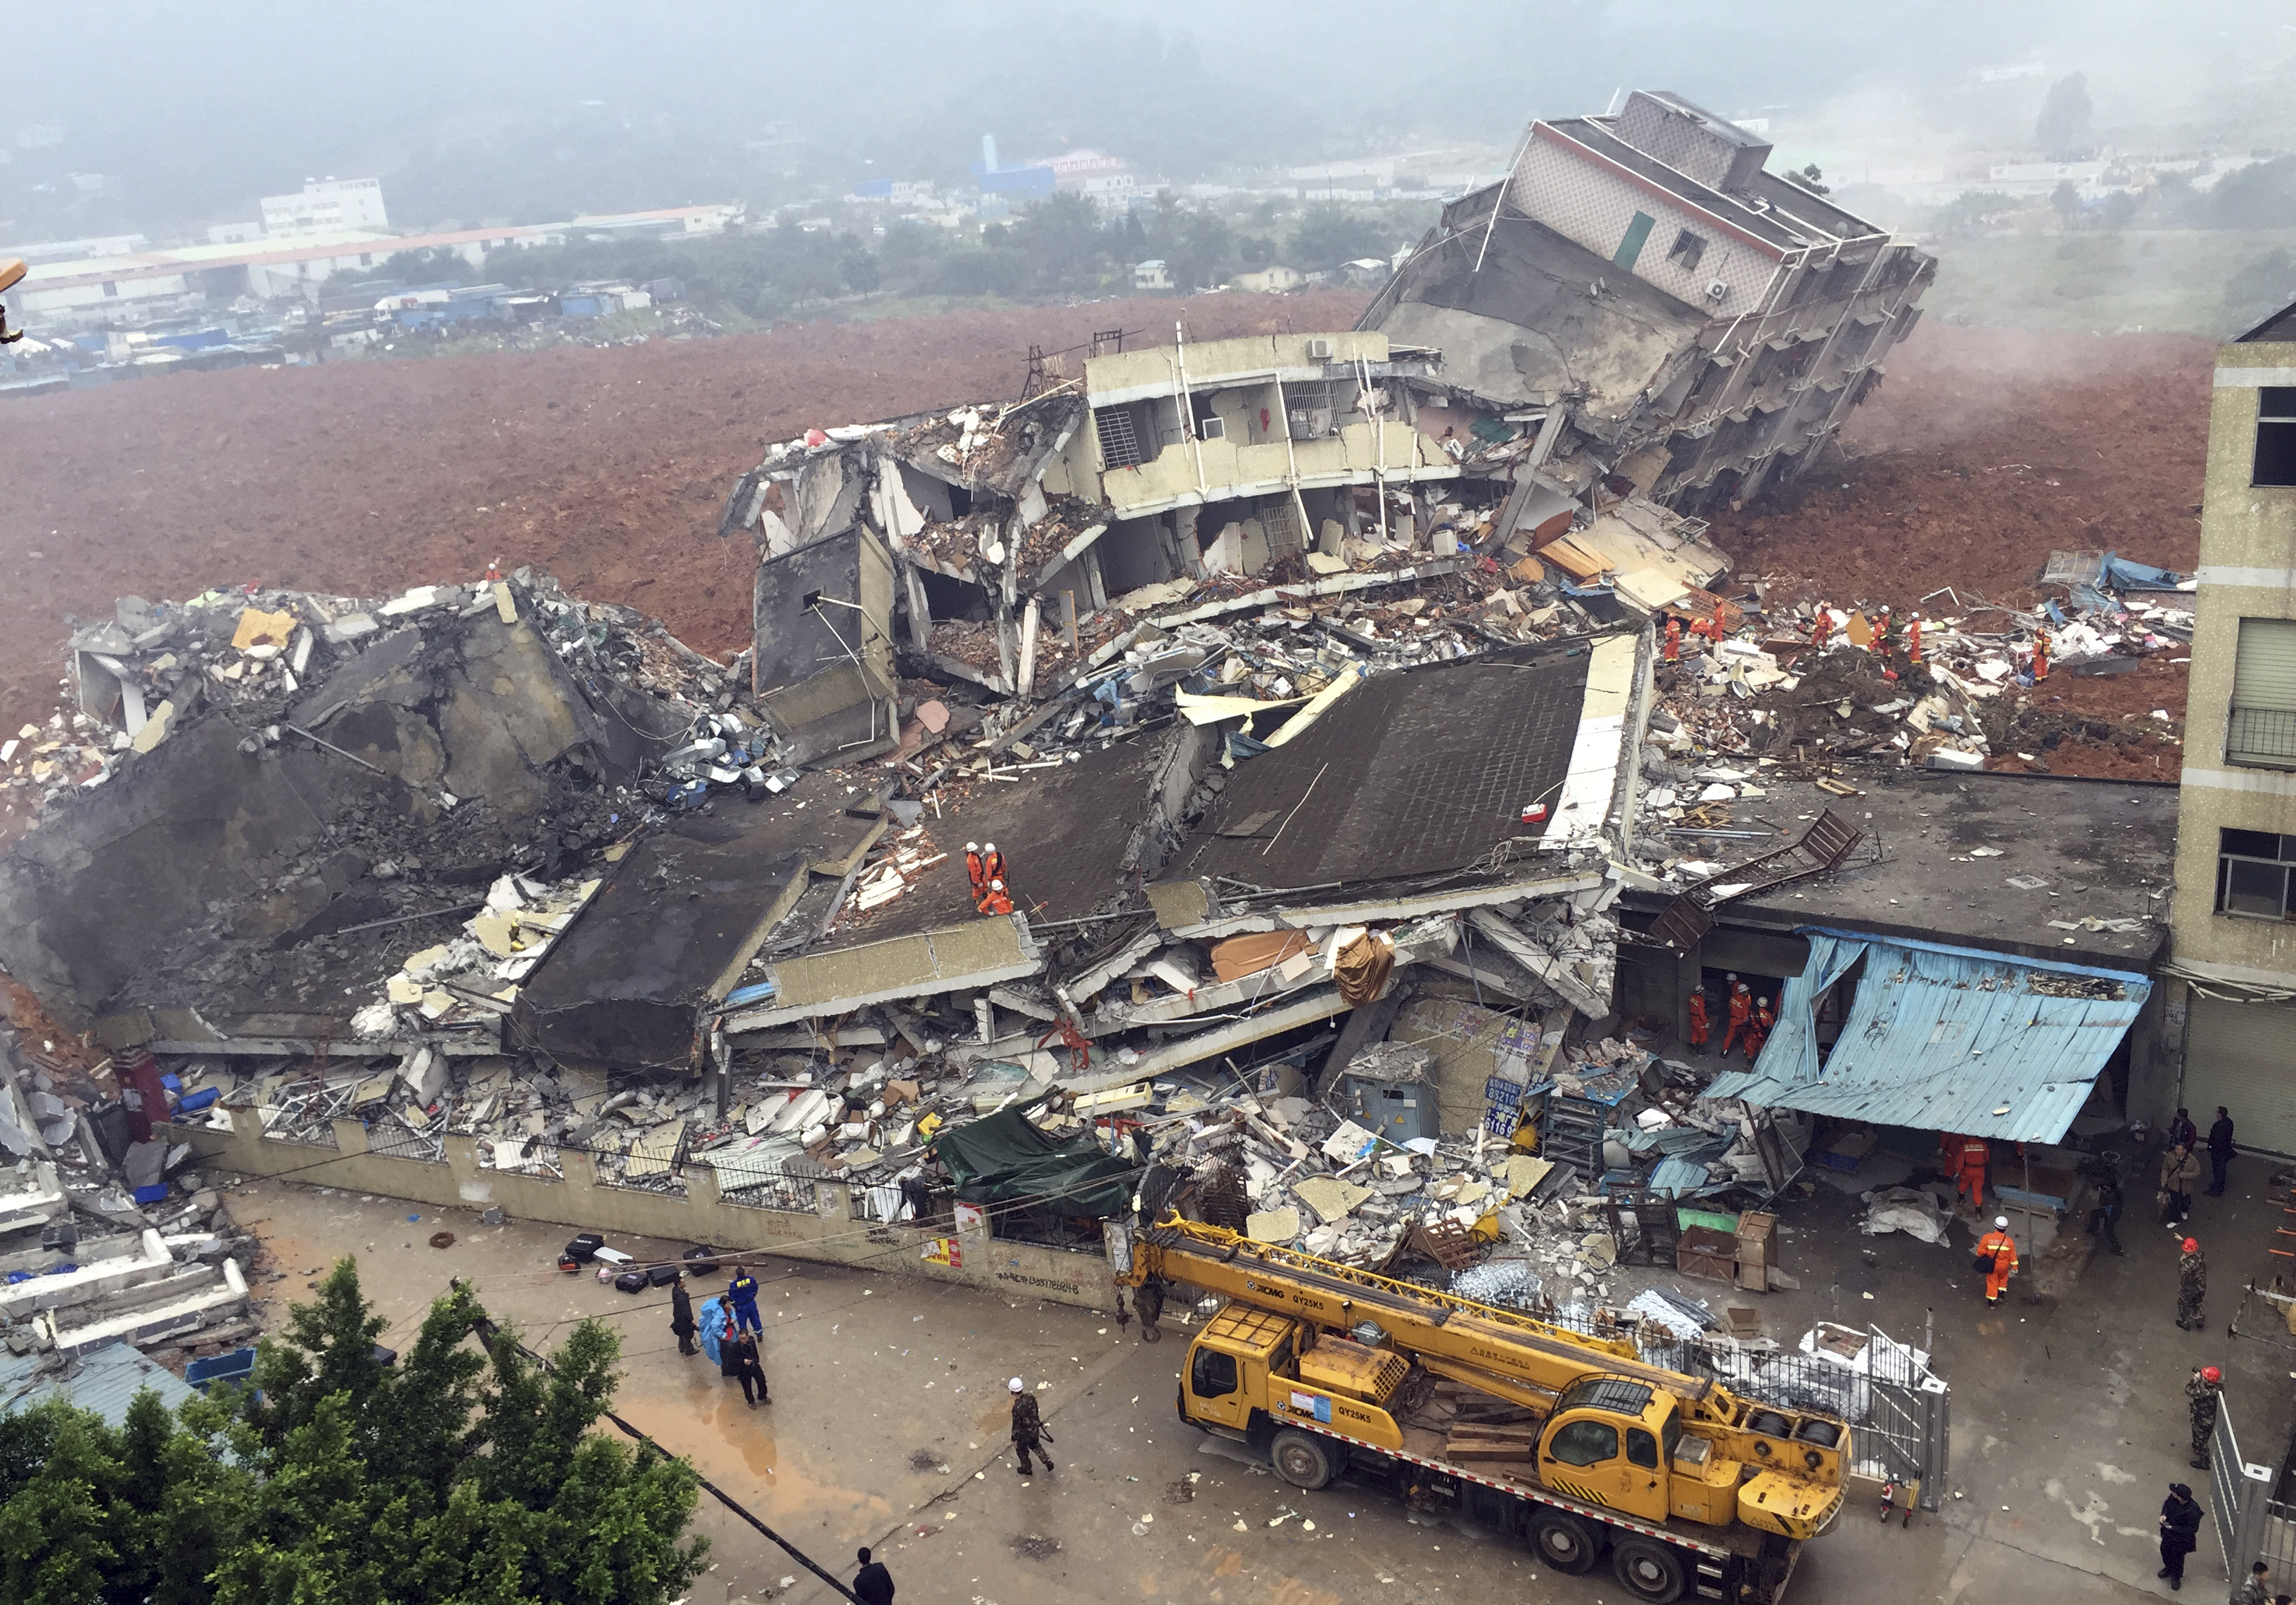 Rescuers search for survivors in the collapsed buildings after a landslide in Shenzhen in south China's Guangdong province on Sunday. The landslide collapsed and buried buildings around an industrial park in the southern Chinese city. Photo: AP